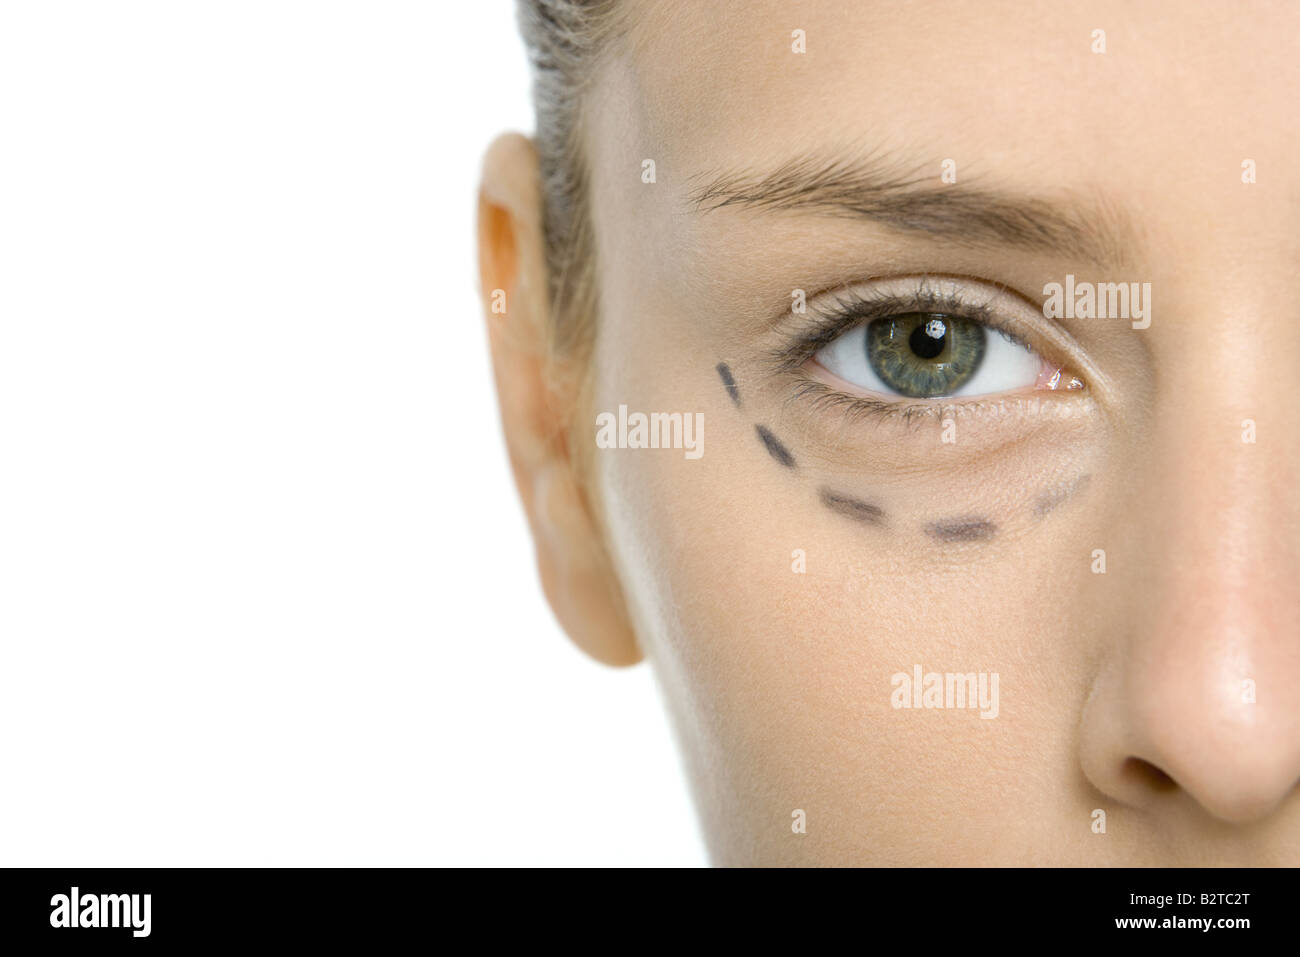 Young woman with plastic surgery markings under eye, cropped view Stock Photo